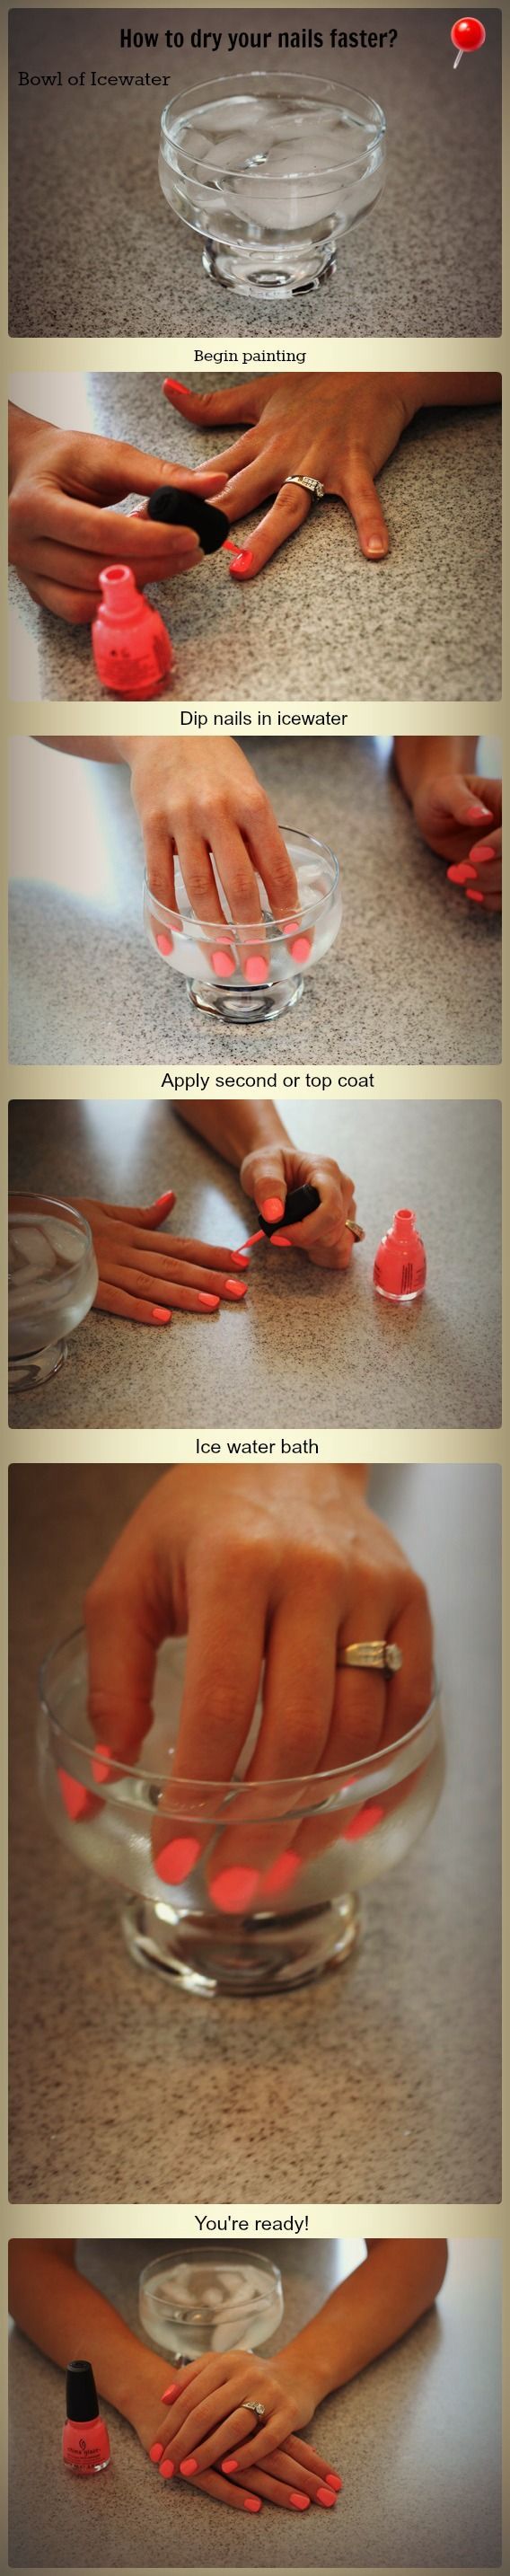 How to dry your nails fast and easy in 5 steps!